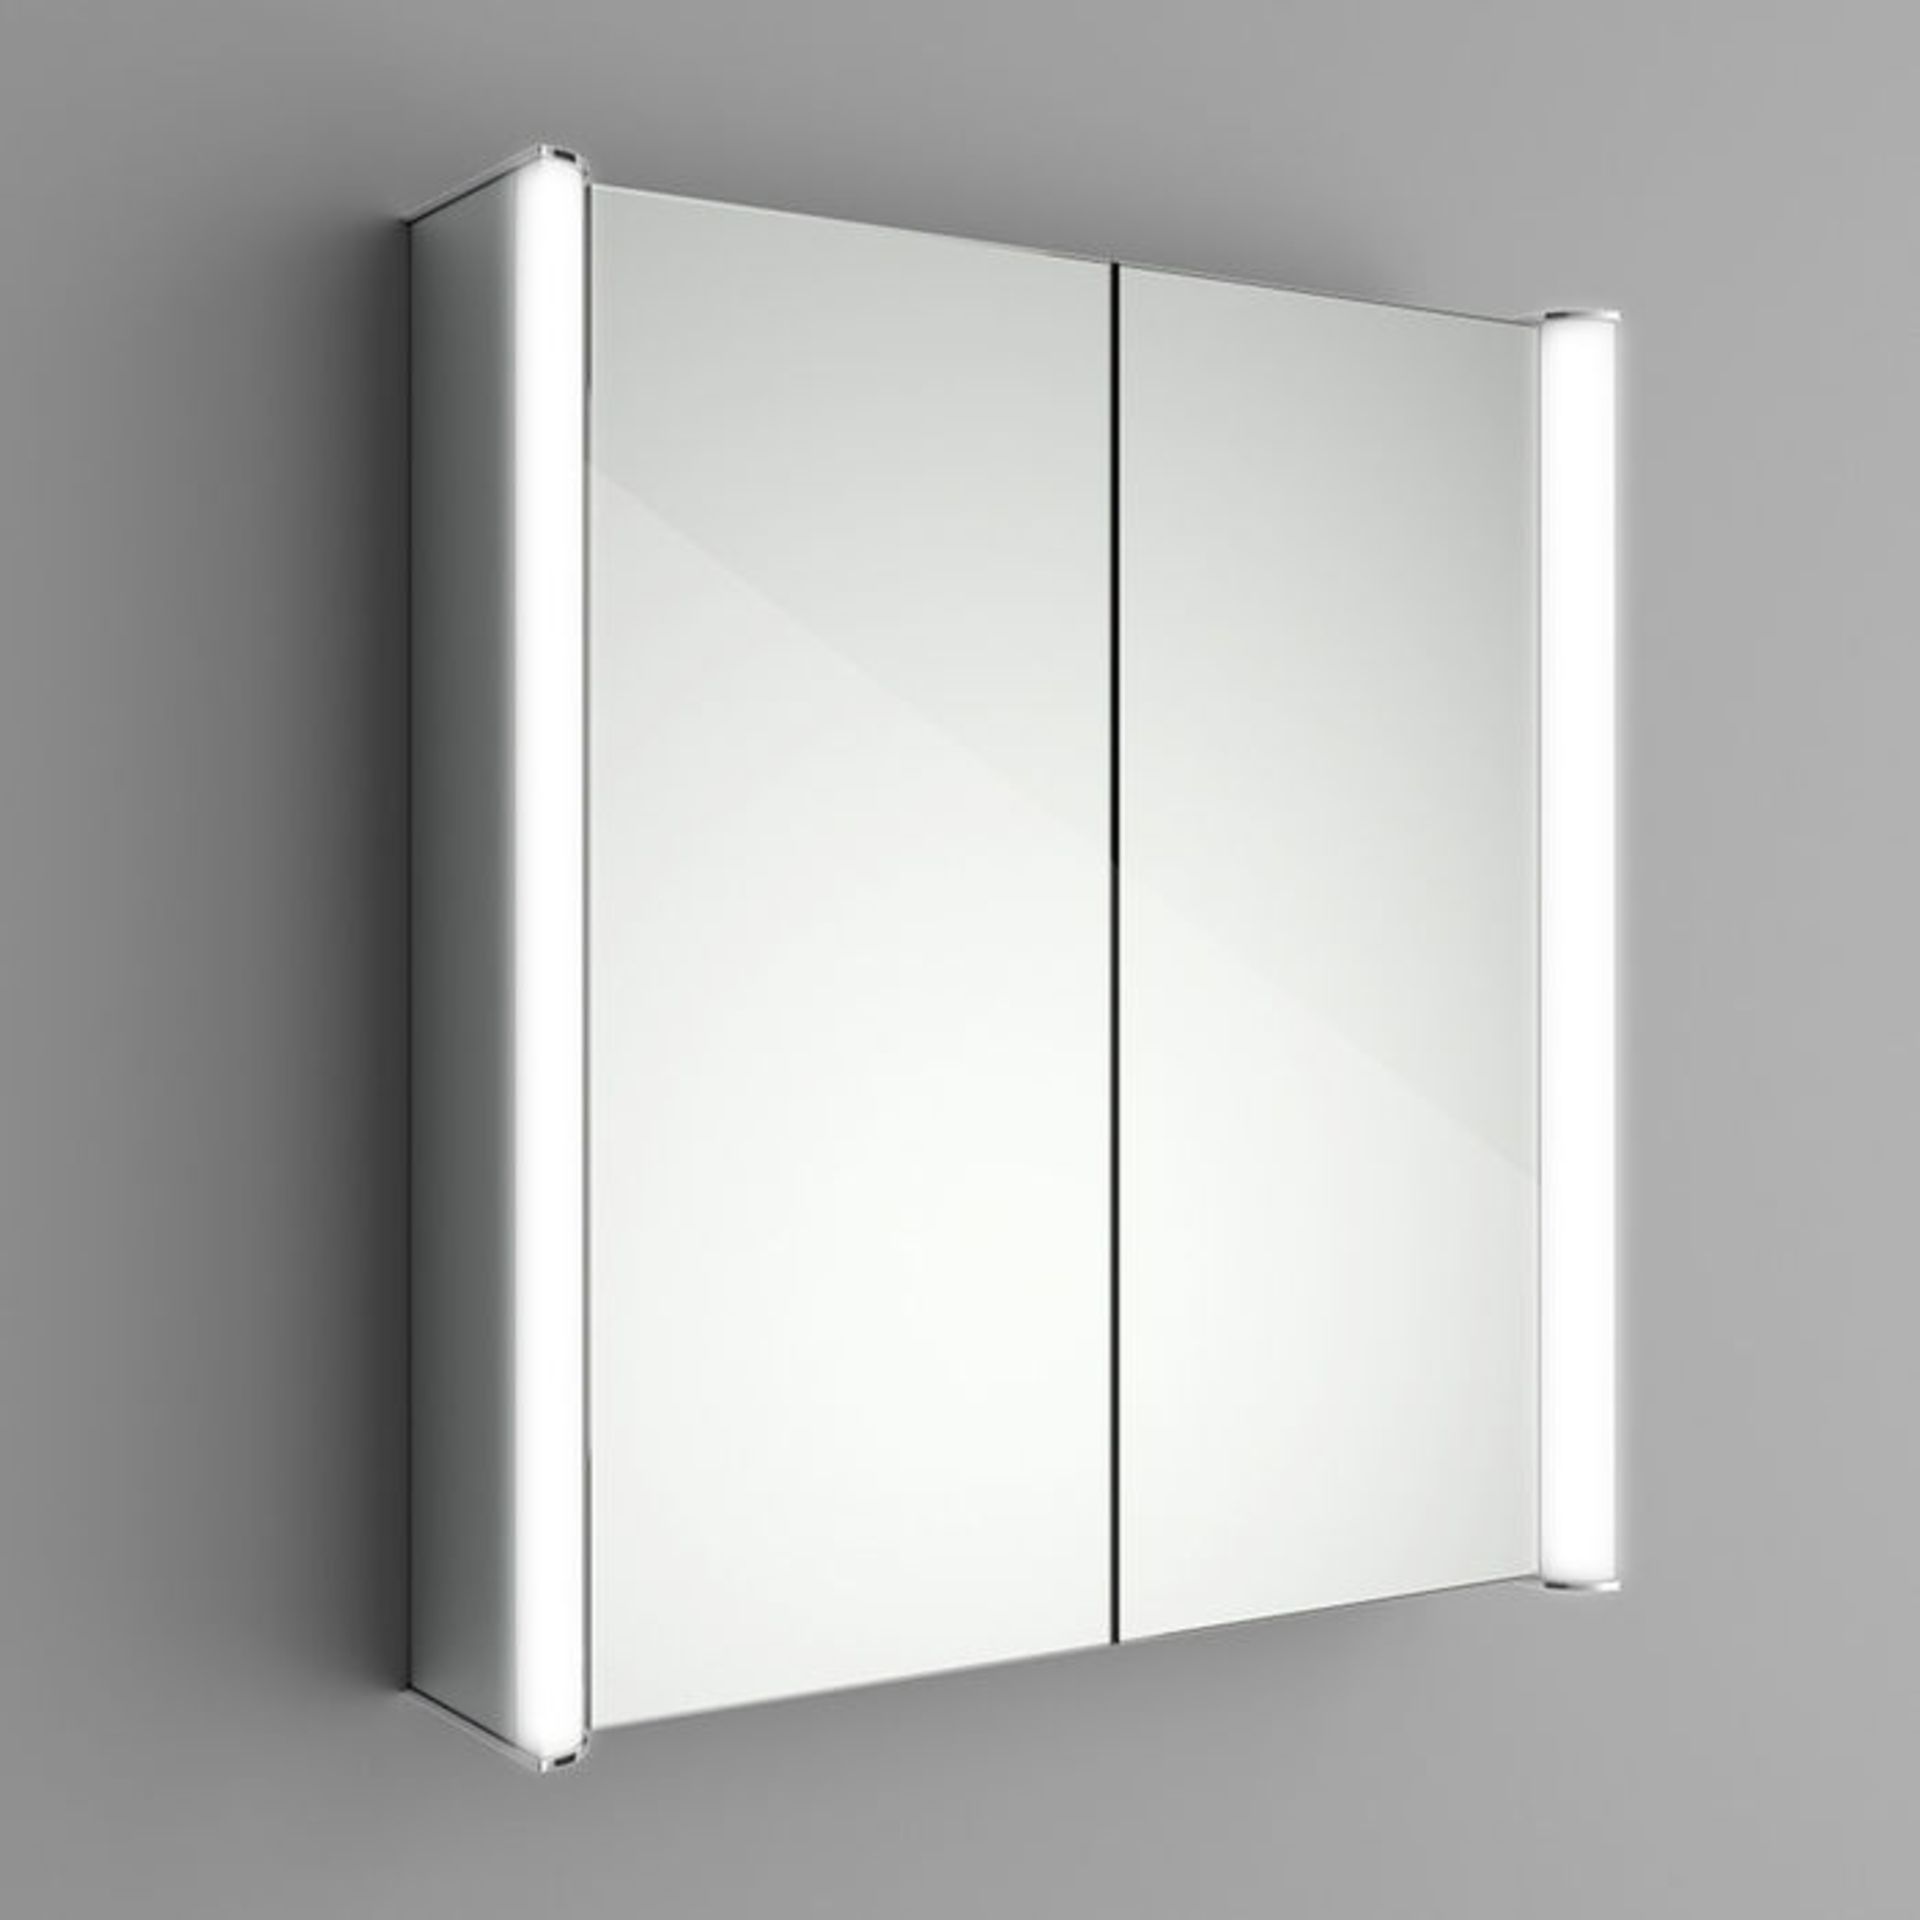 (P66) 600x650mm Bloom Illuminated LED Mirror Cabinet & Shaver Socket. RRP £499.99. Double Sided - Image 4 of 5